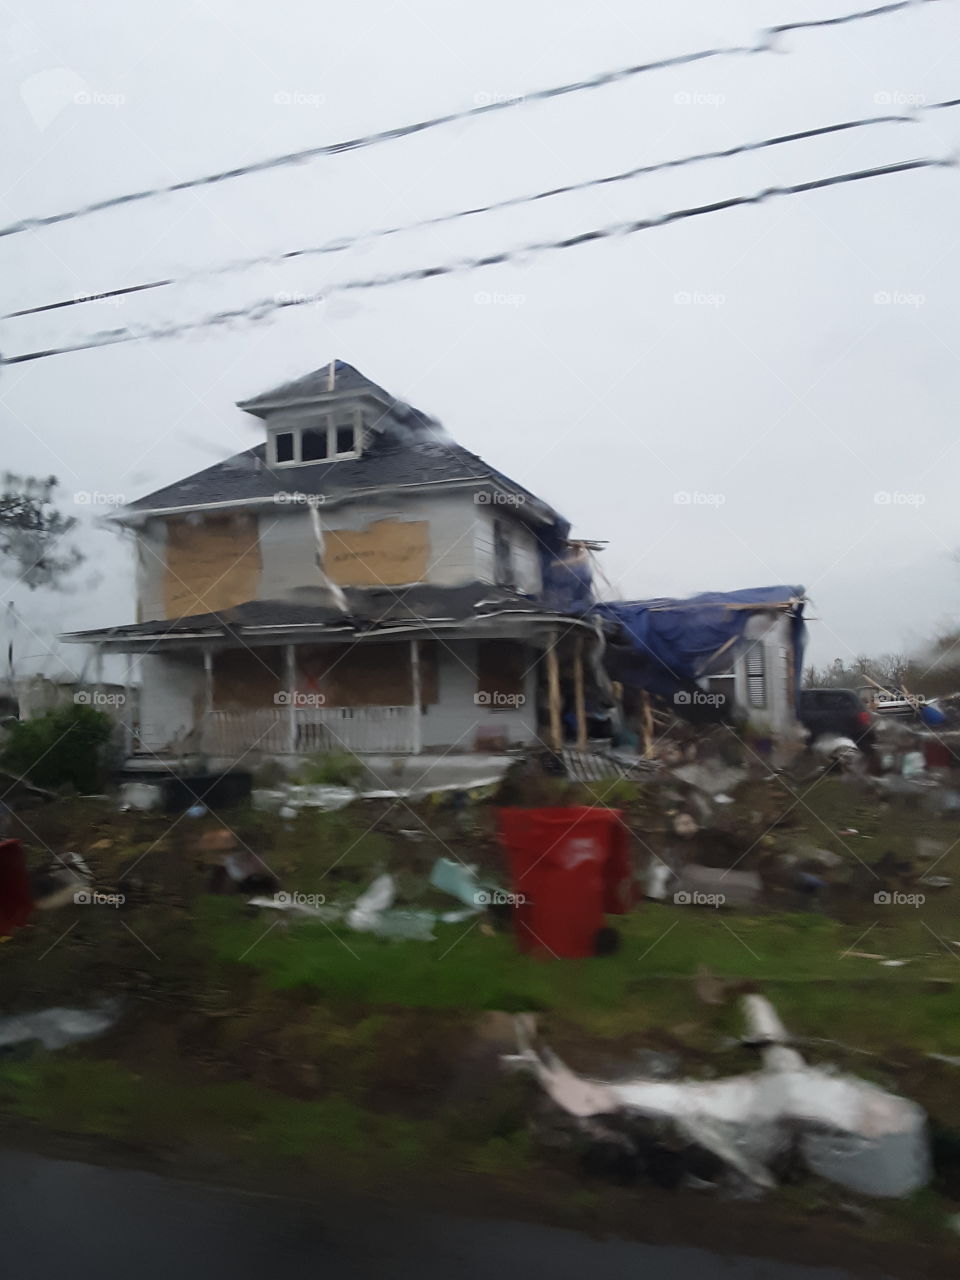 A house hit hard by a tornado, destroyed and abandoned, with trash and peices of rubble thrown about.